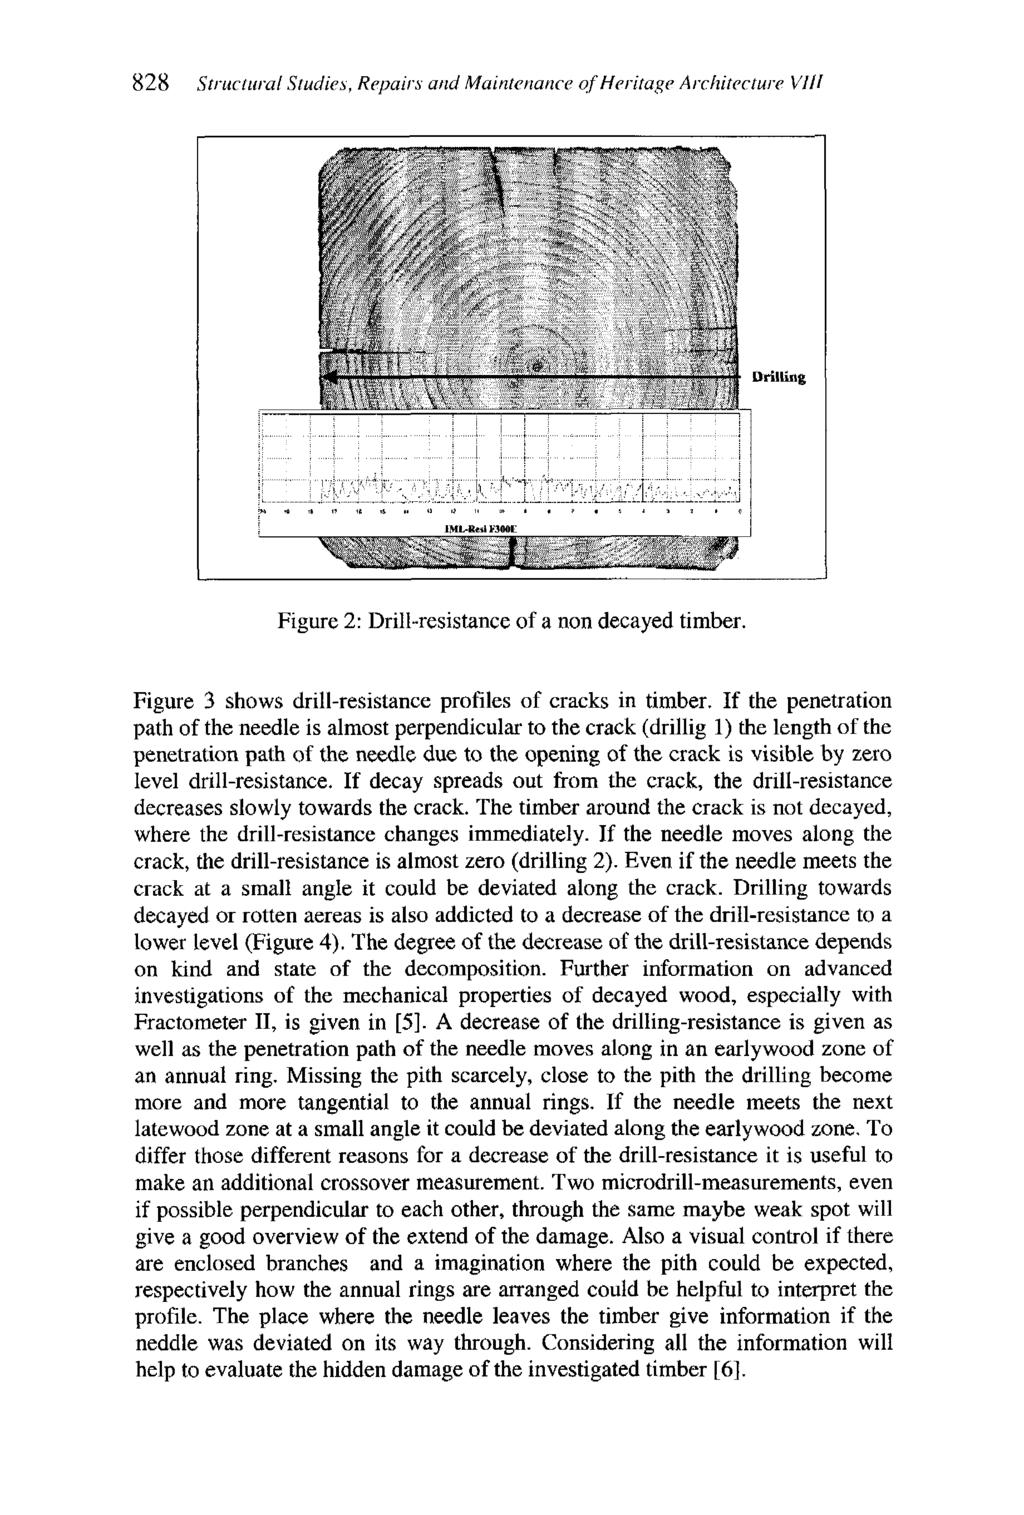 828 Strrcctrrral Srudir~, Rrpam atrd Marnrorancr of Hrriragr Aldzirrcruw V111 Figure 2: Drill-resistance of a non decayed timber. Figure 3 shows drill-resistance profiles of cracks in timber.